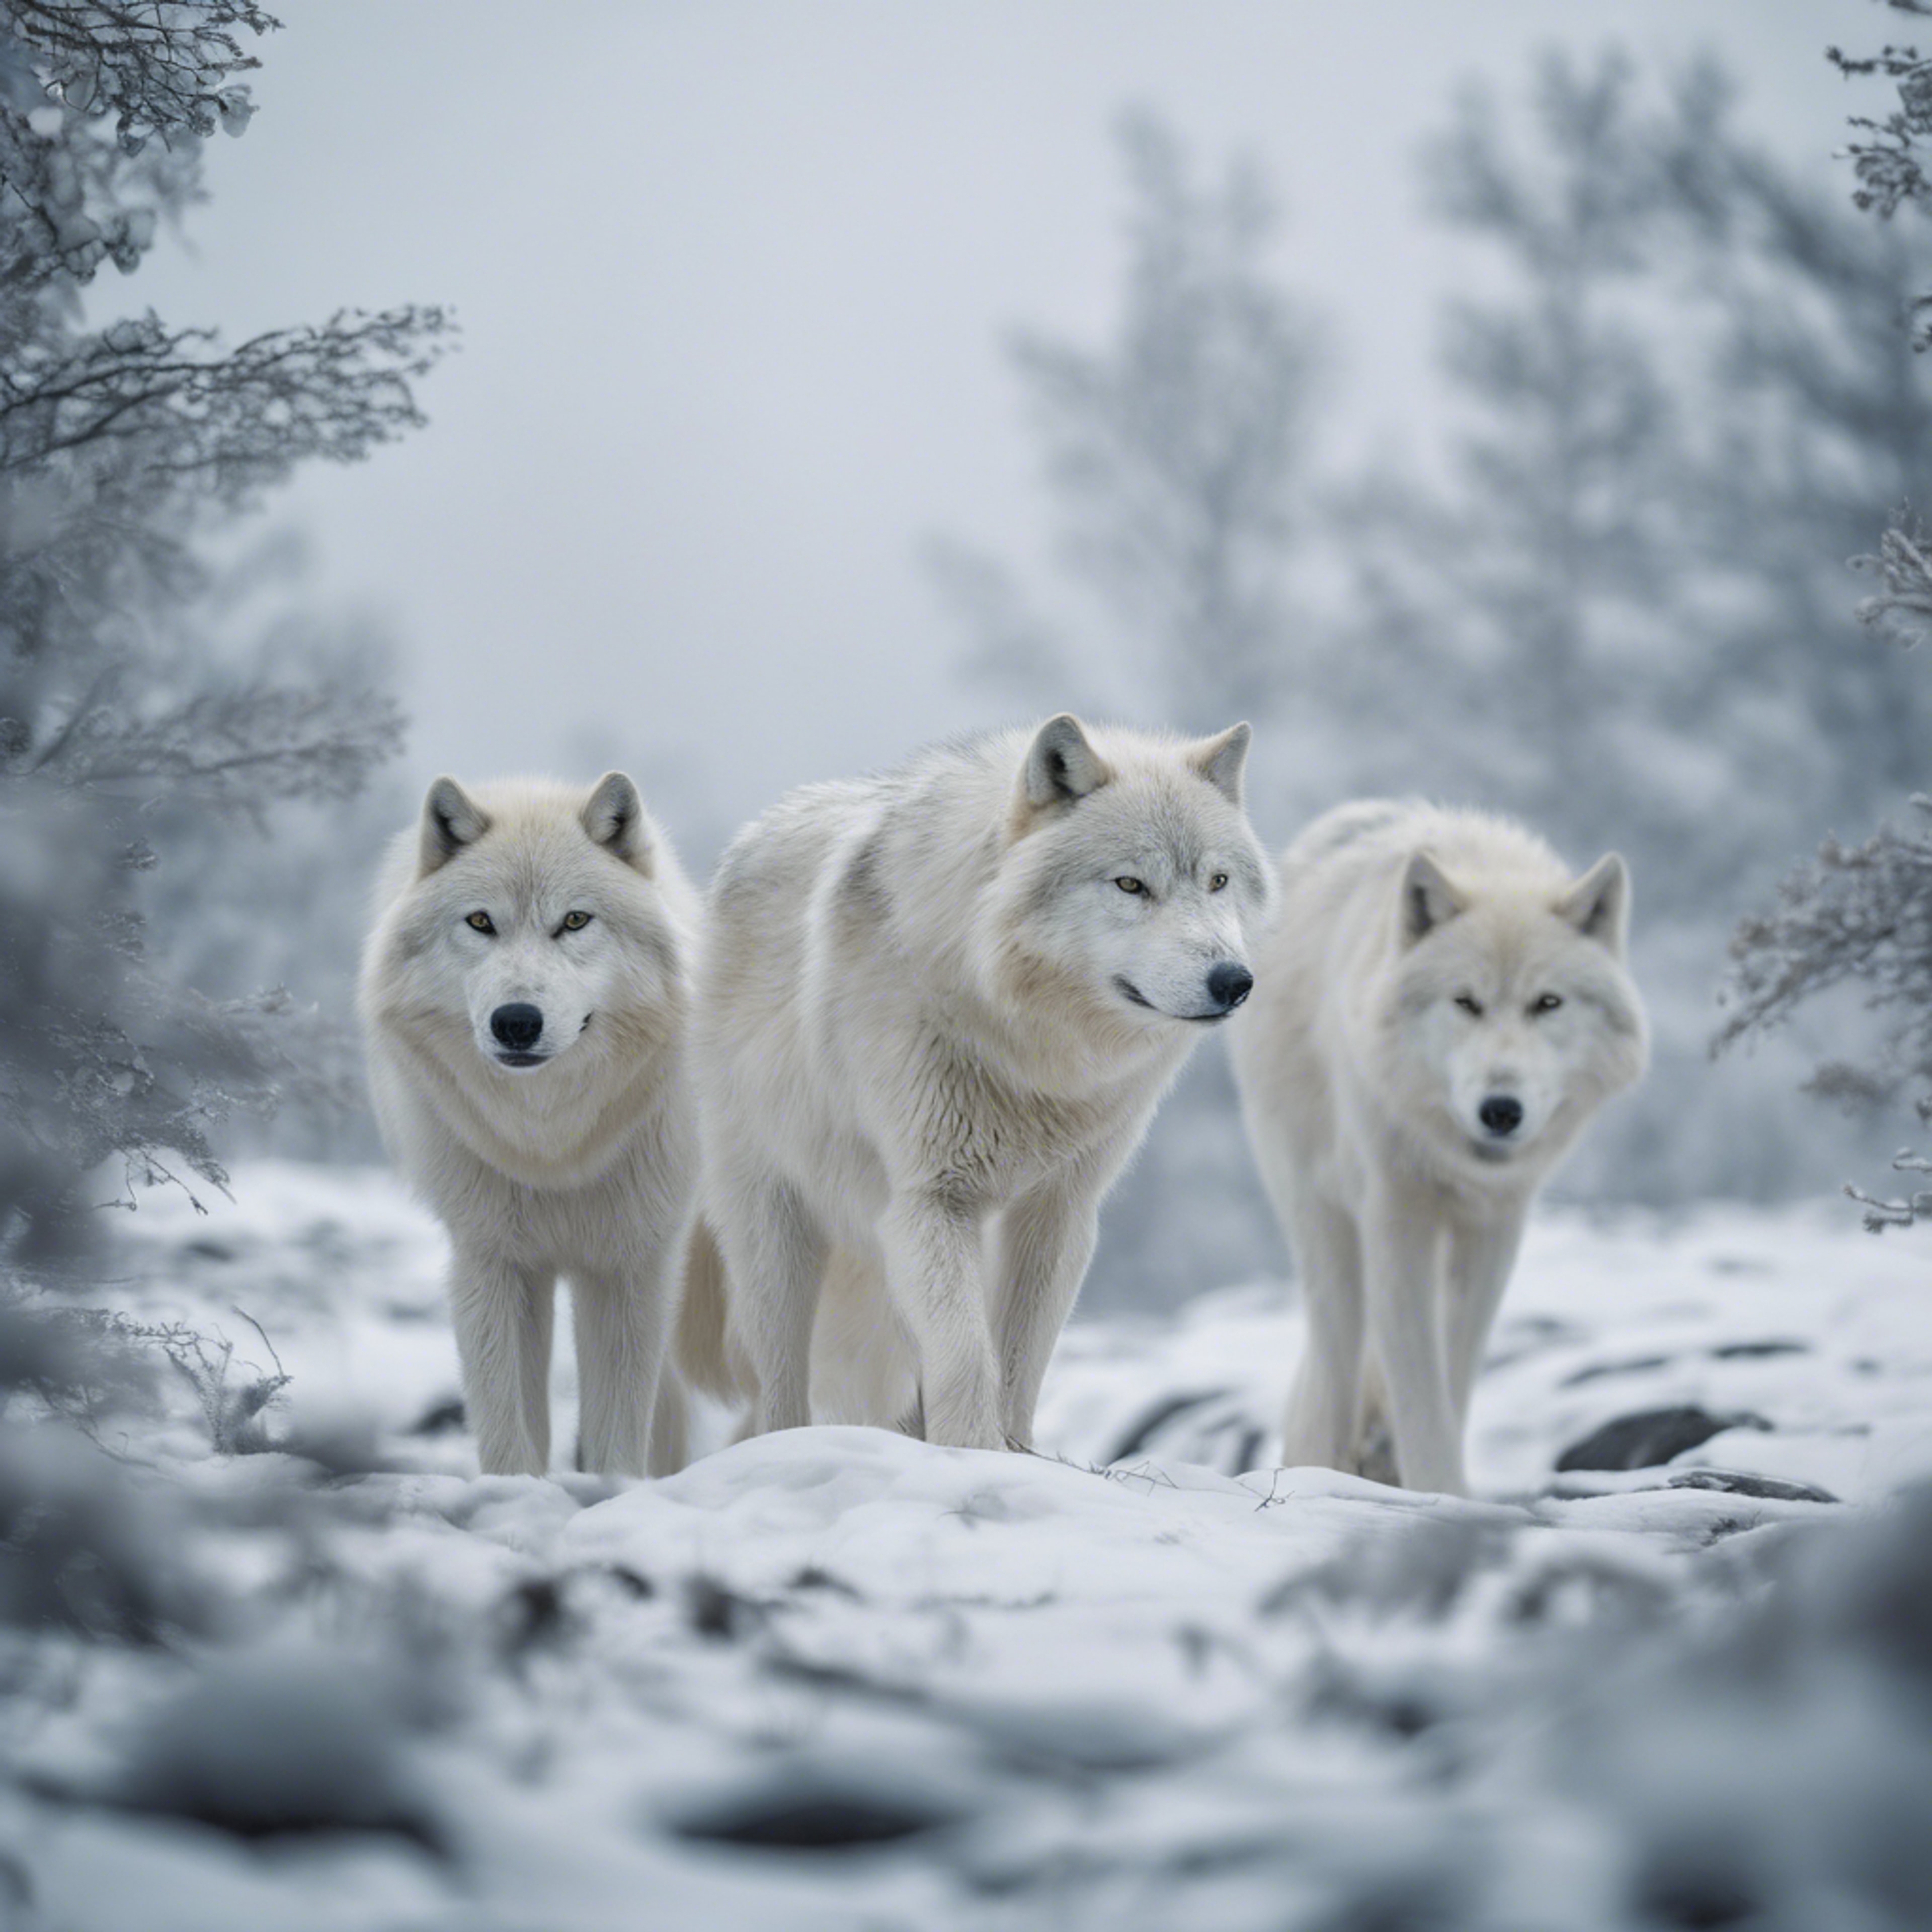 An Arctic landscape, a group of silver white wolves prowling in the misty white snow. Обои[d8abdf0eee2a43a8a025]